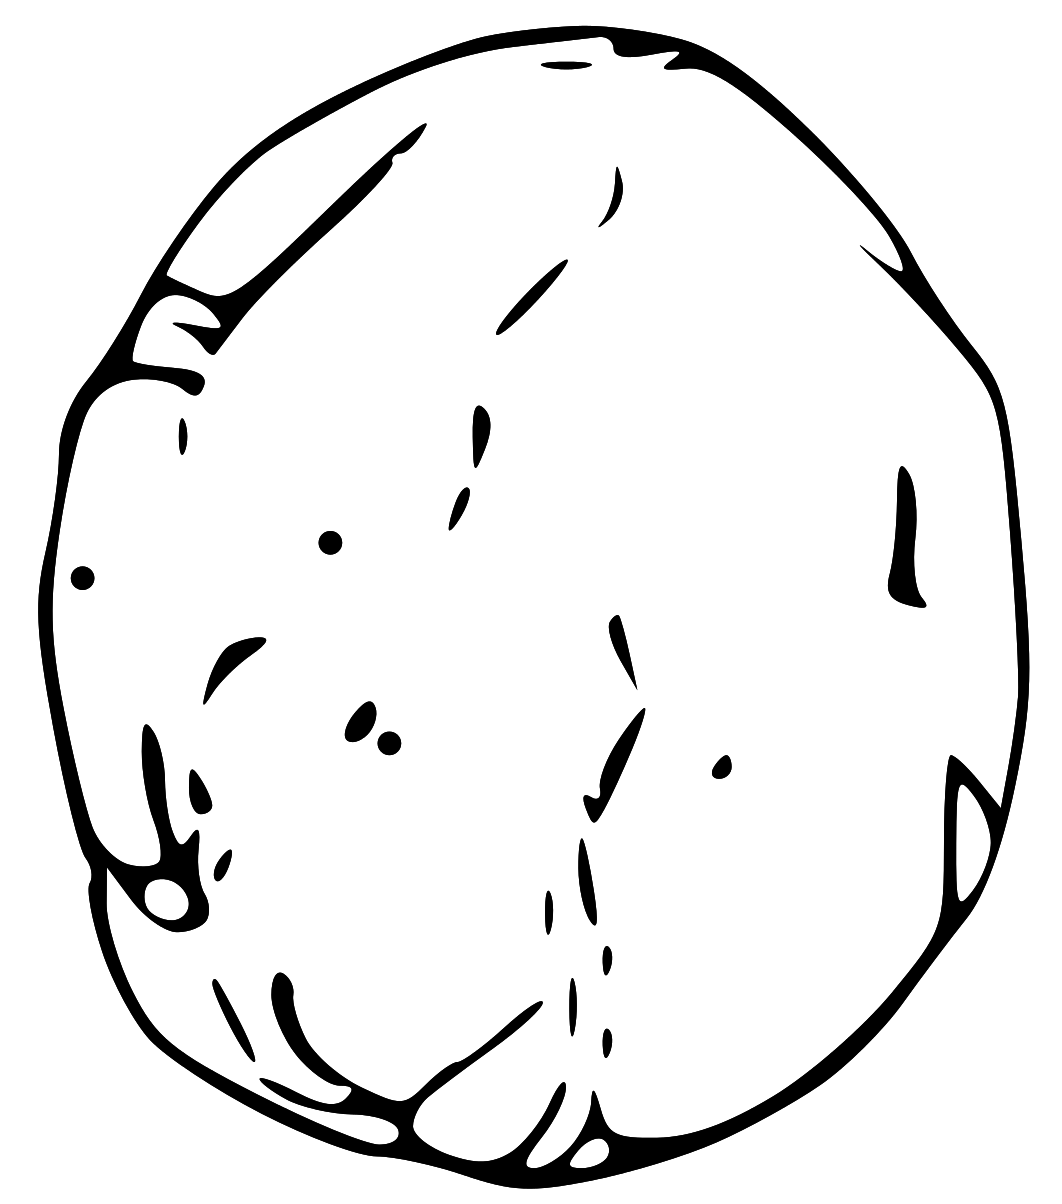 boulder clipart black and white